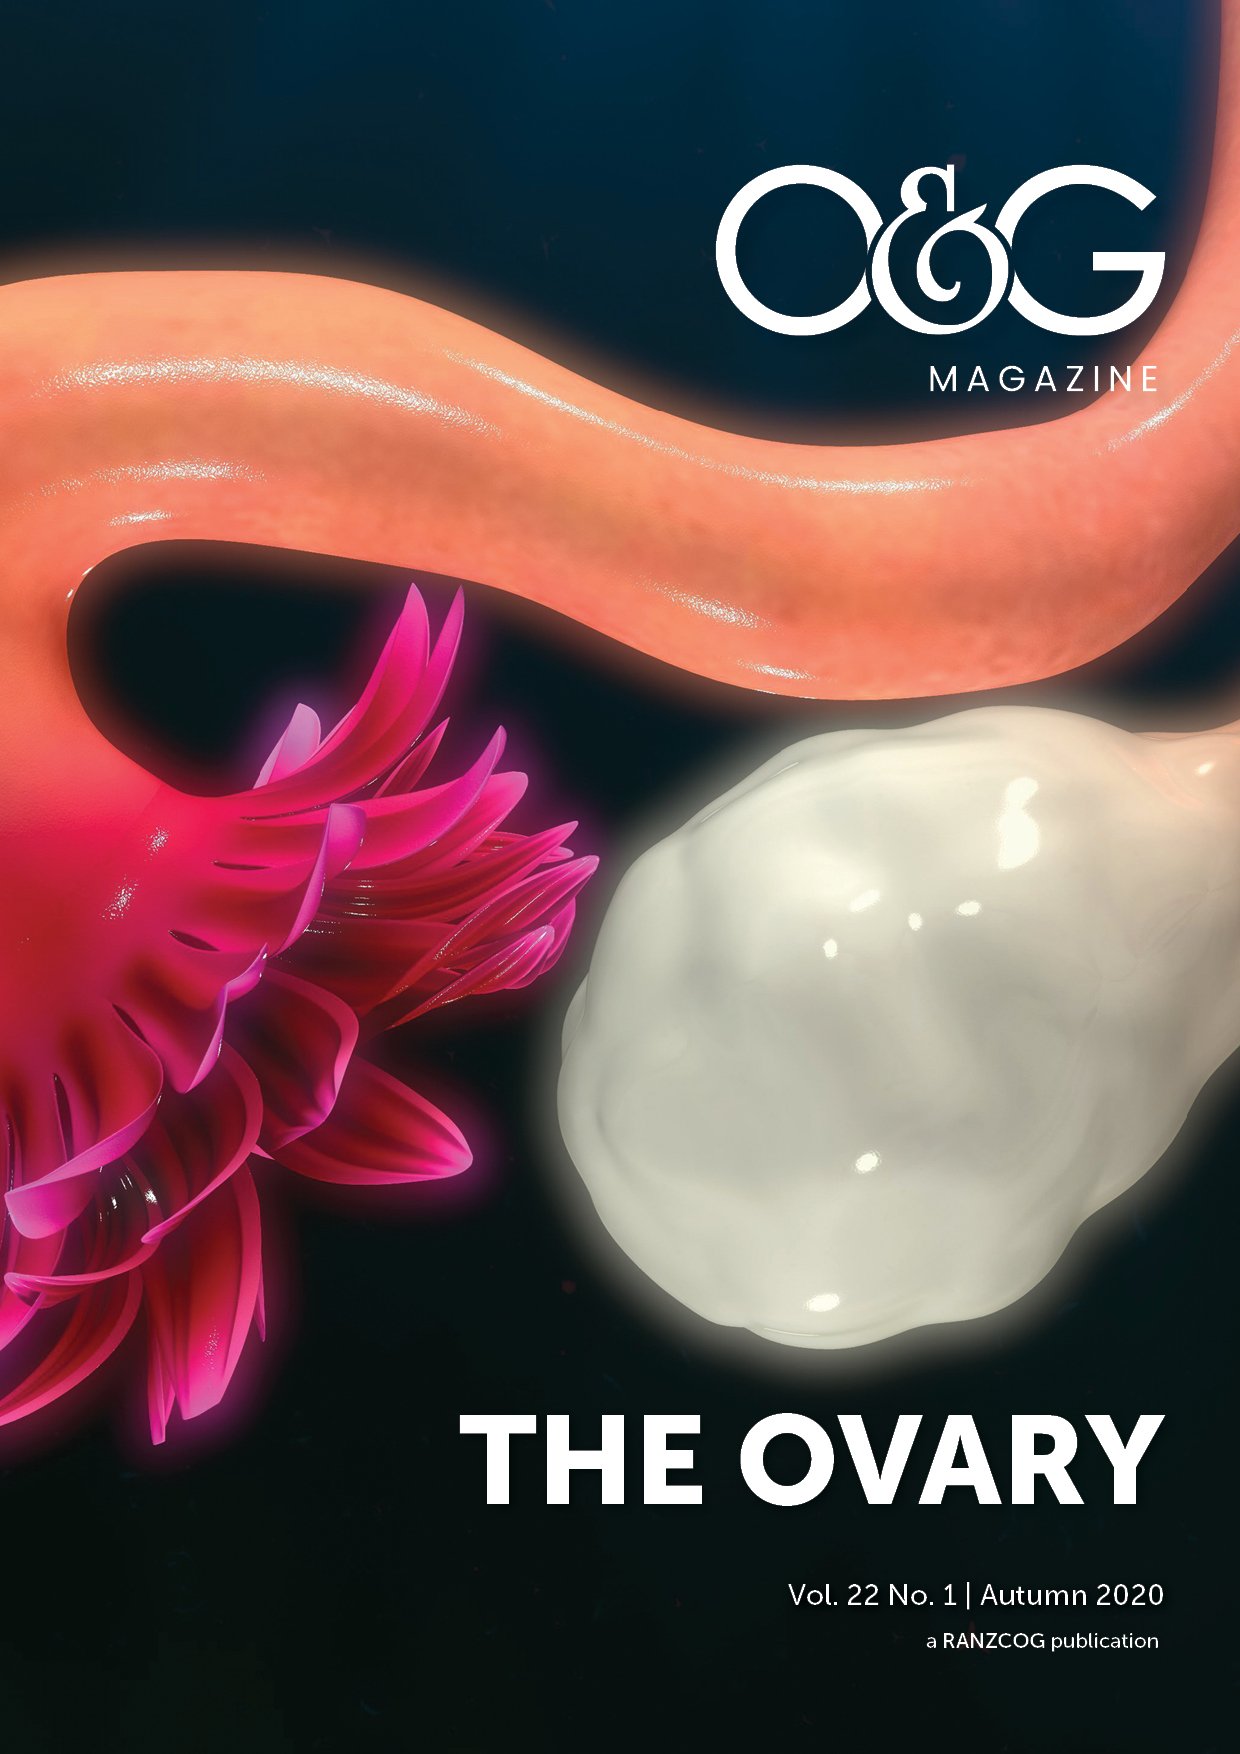 How to manage a complex ovarian cyst – O&G Magazine